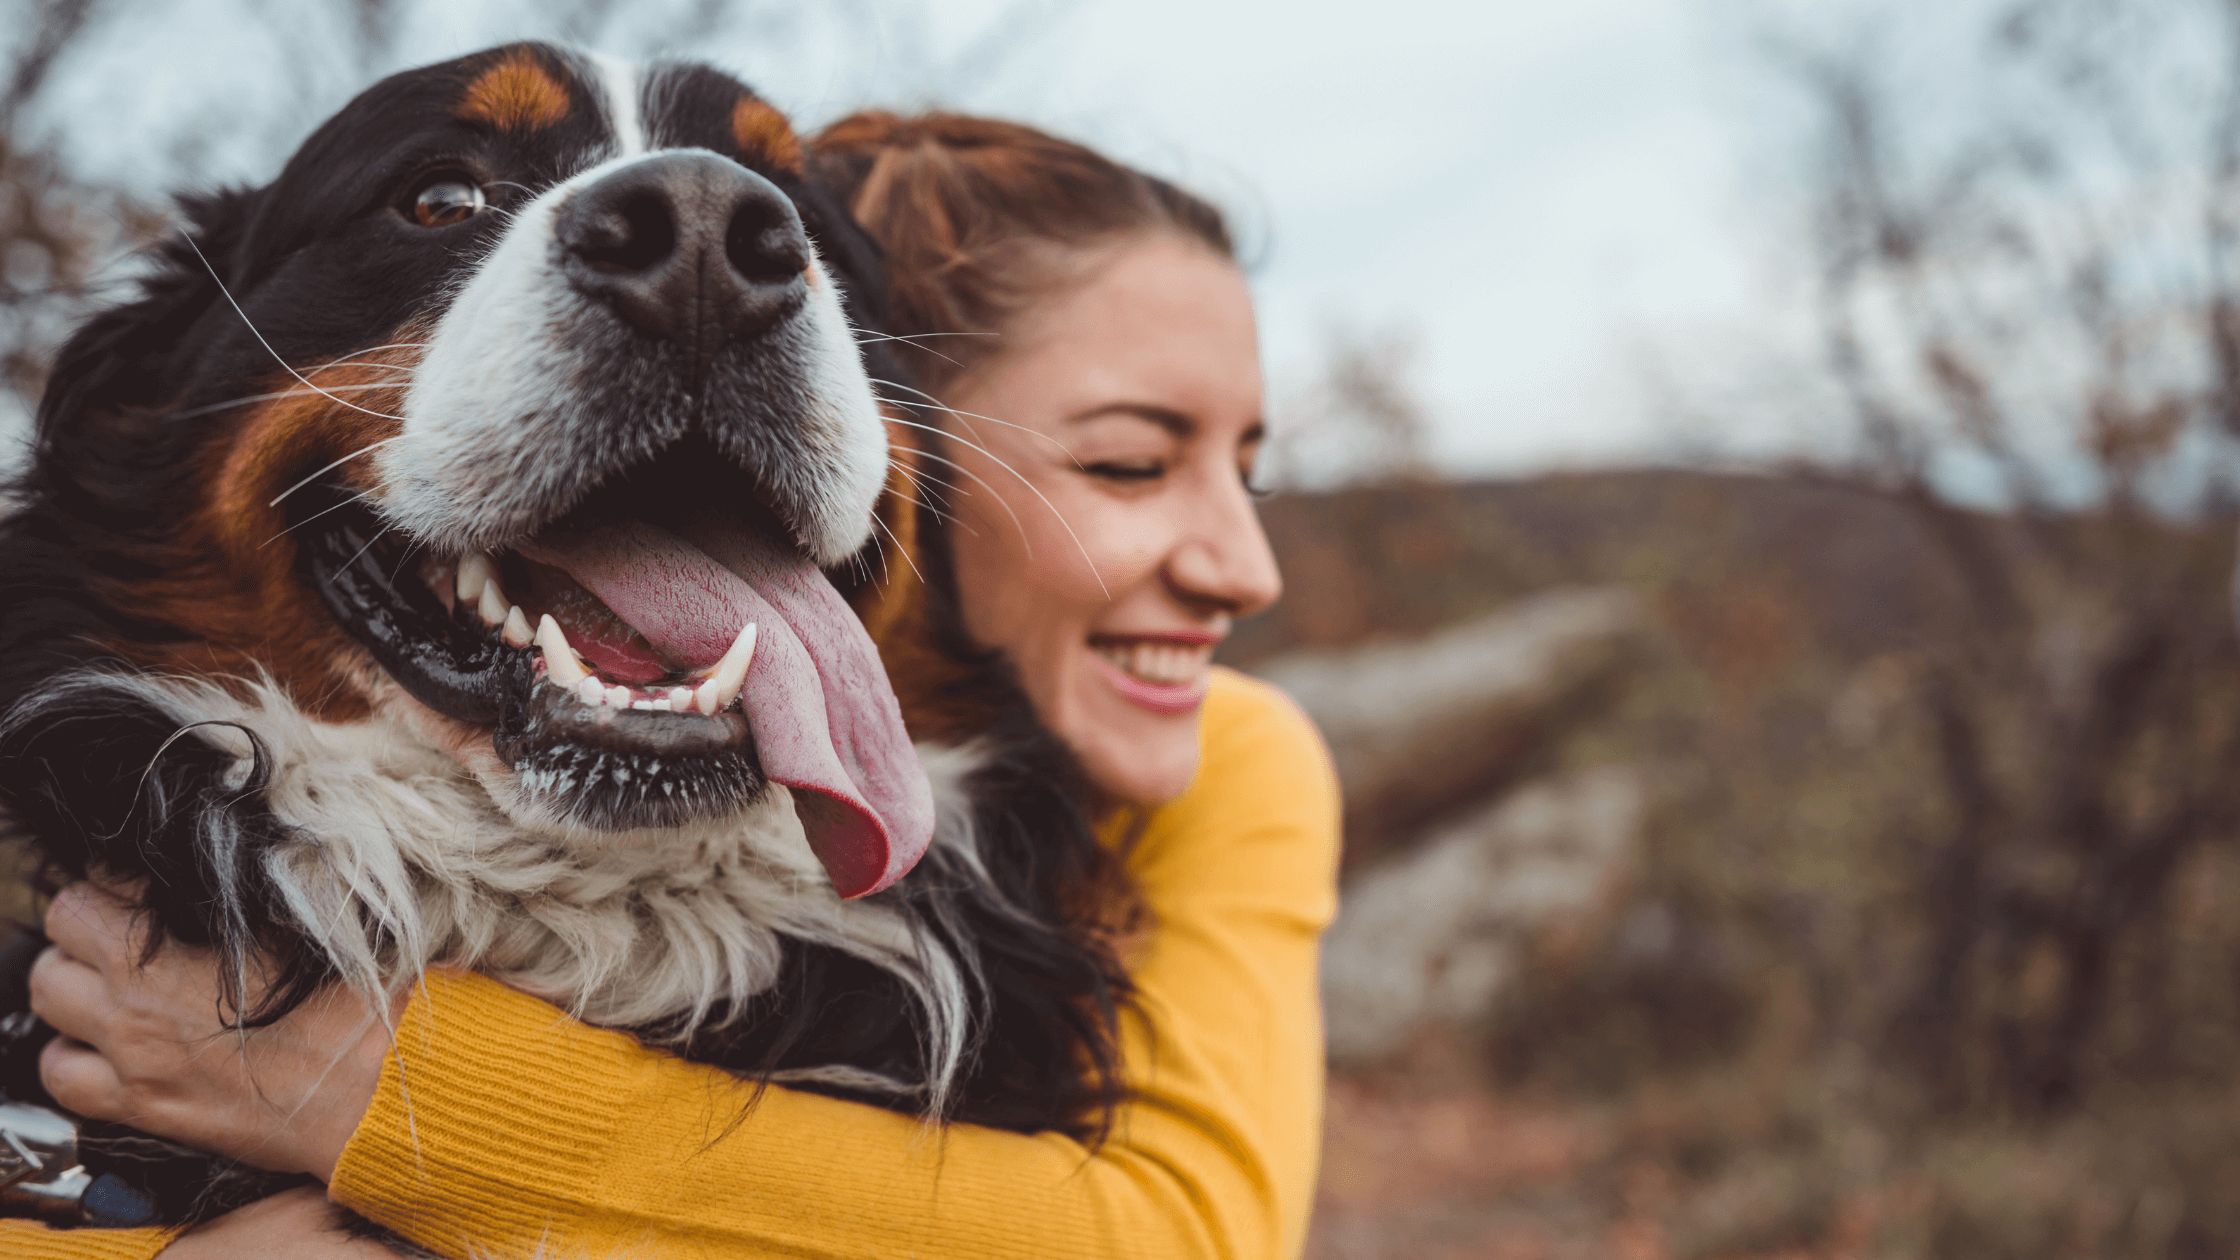 Dog smiling and happy at being hugged by owner